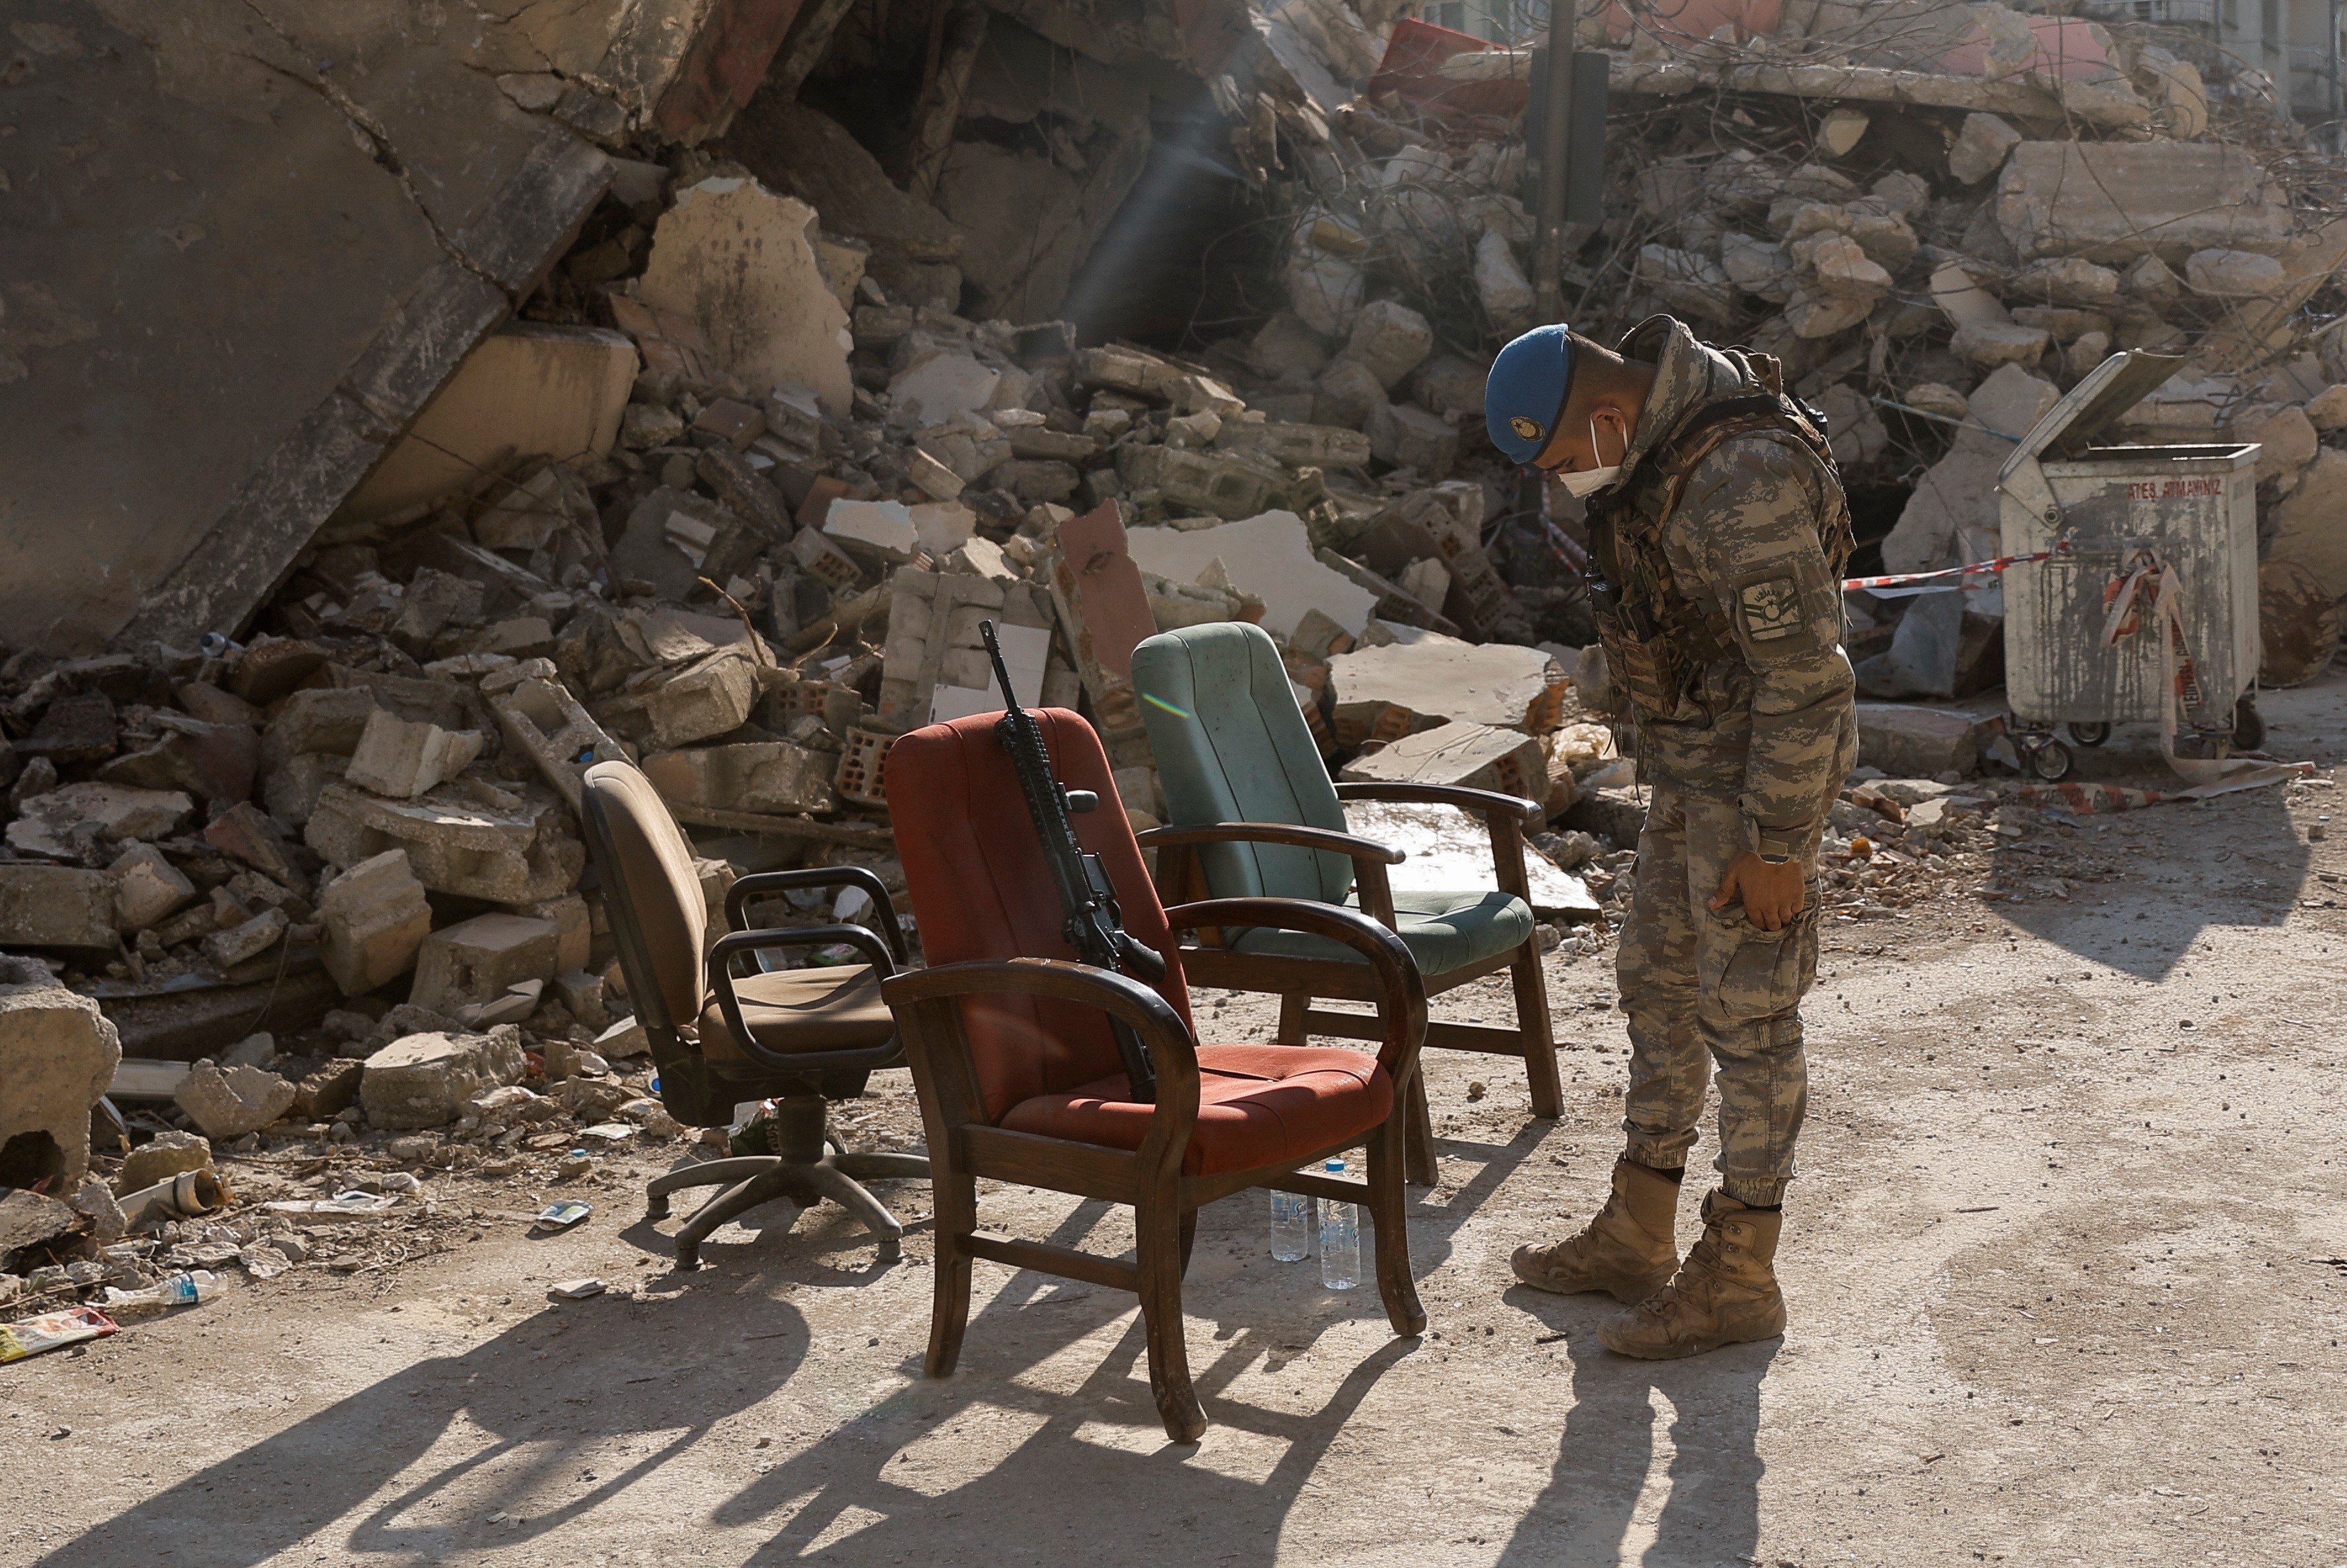 A Turkish serviceman stands at the site of a collapsed building, in the aftermath of the deadly earthquake, in Antakya, Turkey February 18, 2023. Photo: Reuters